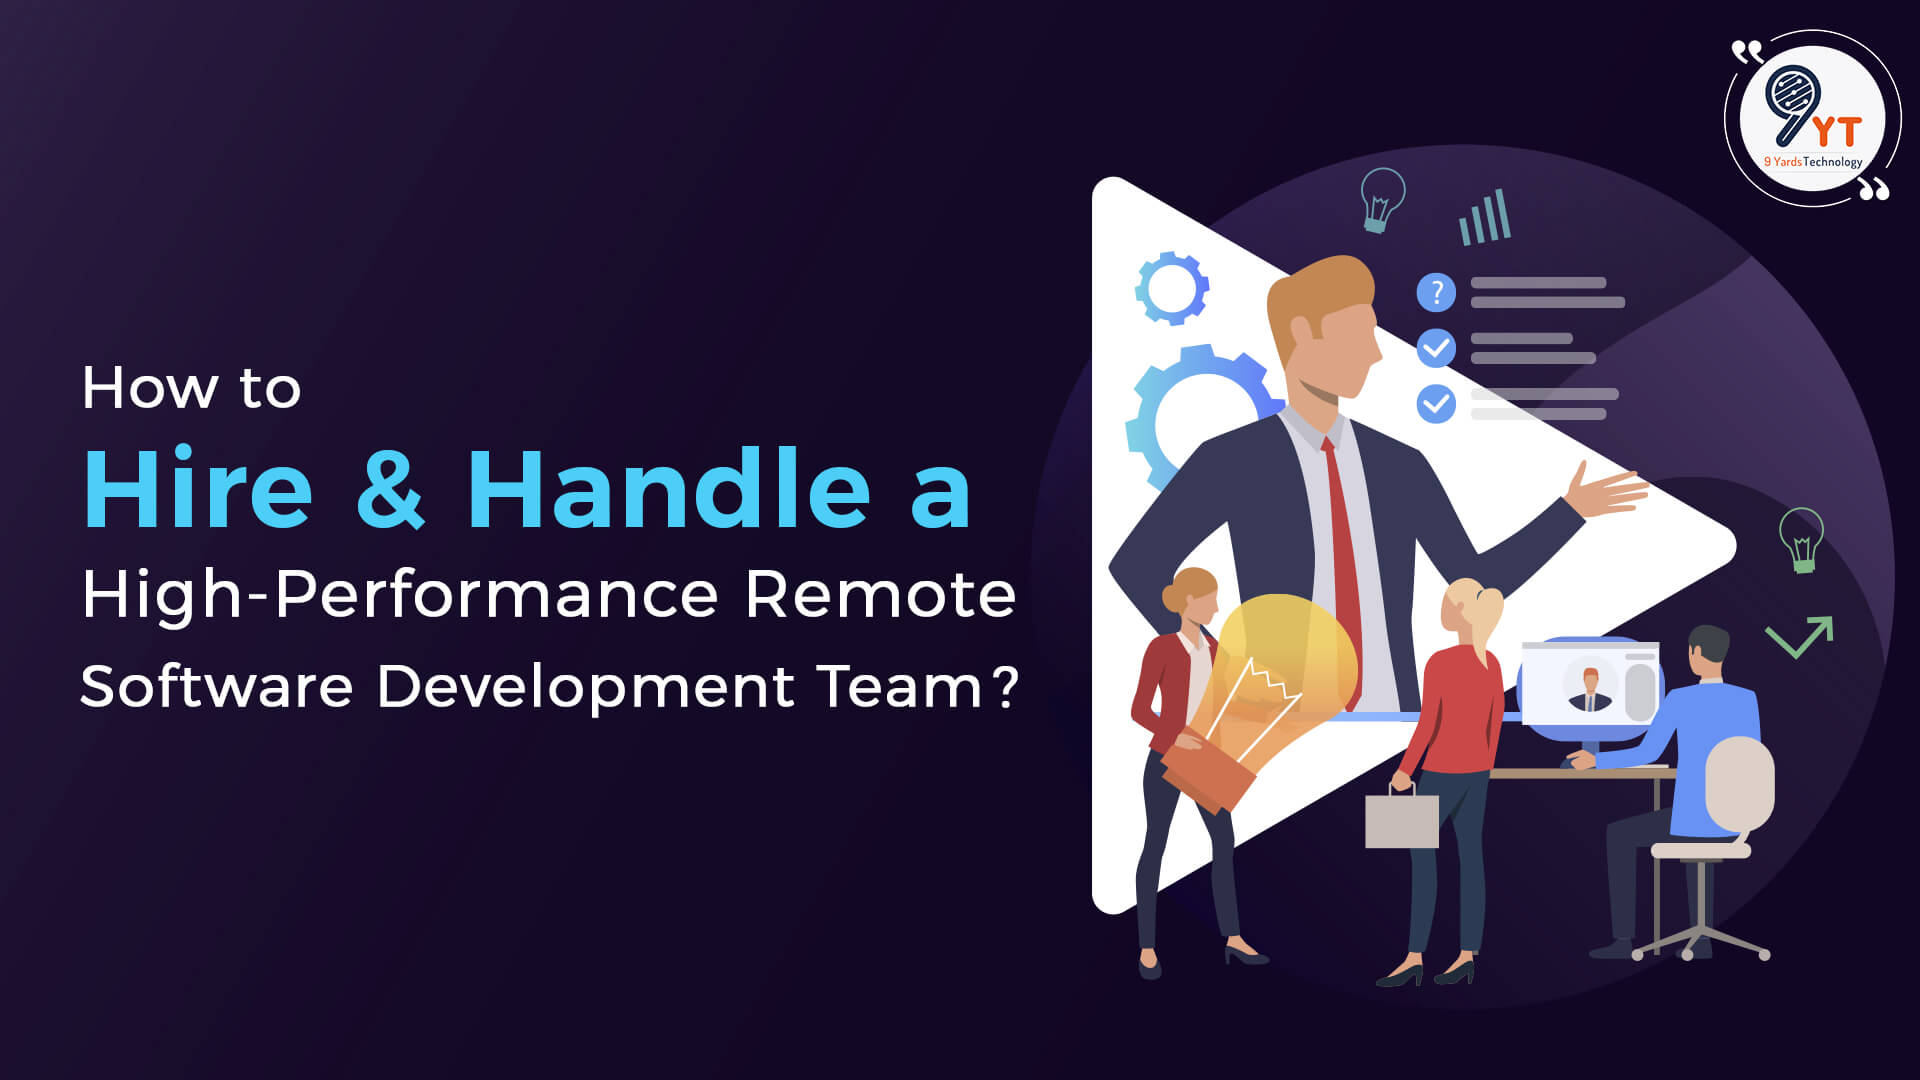 How to Hire and Handle a High-Performance Remote Software Development Team?